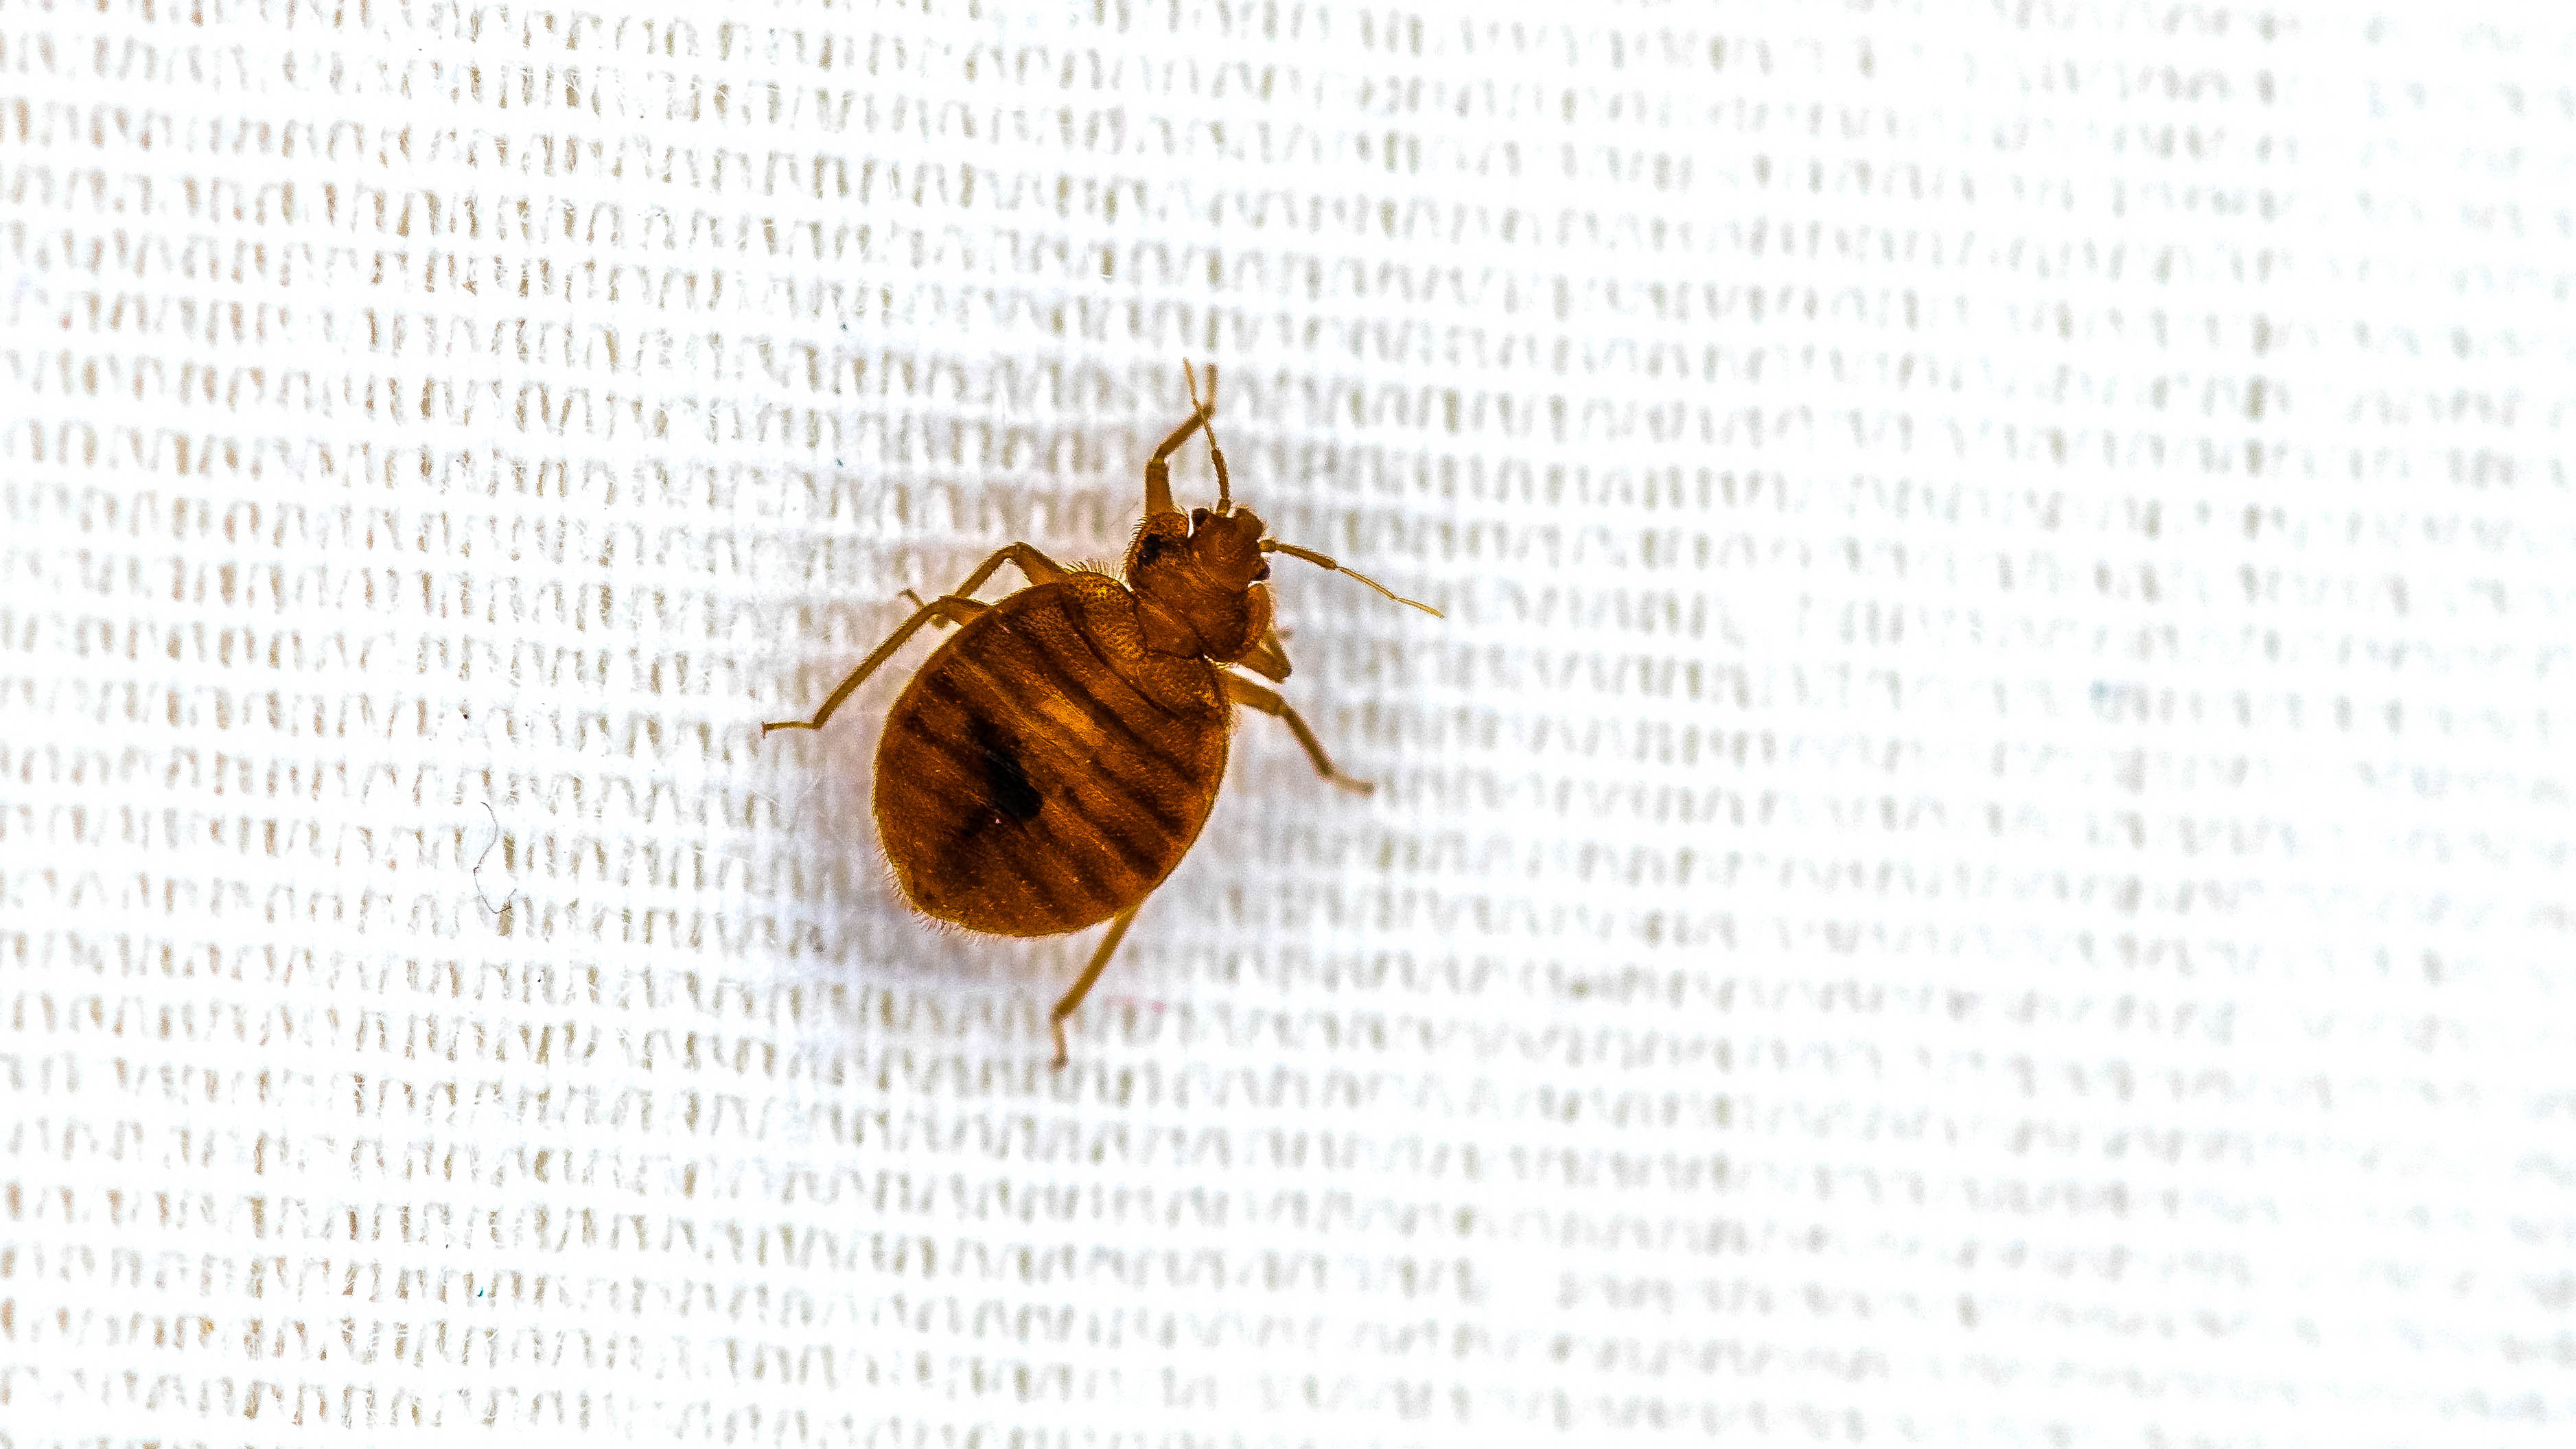 A close up of a bed bug on white fabric